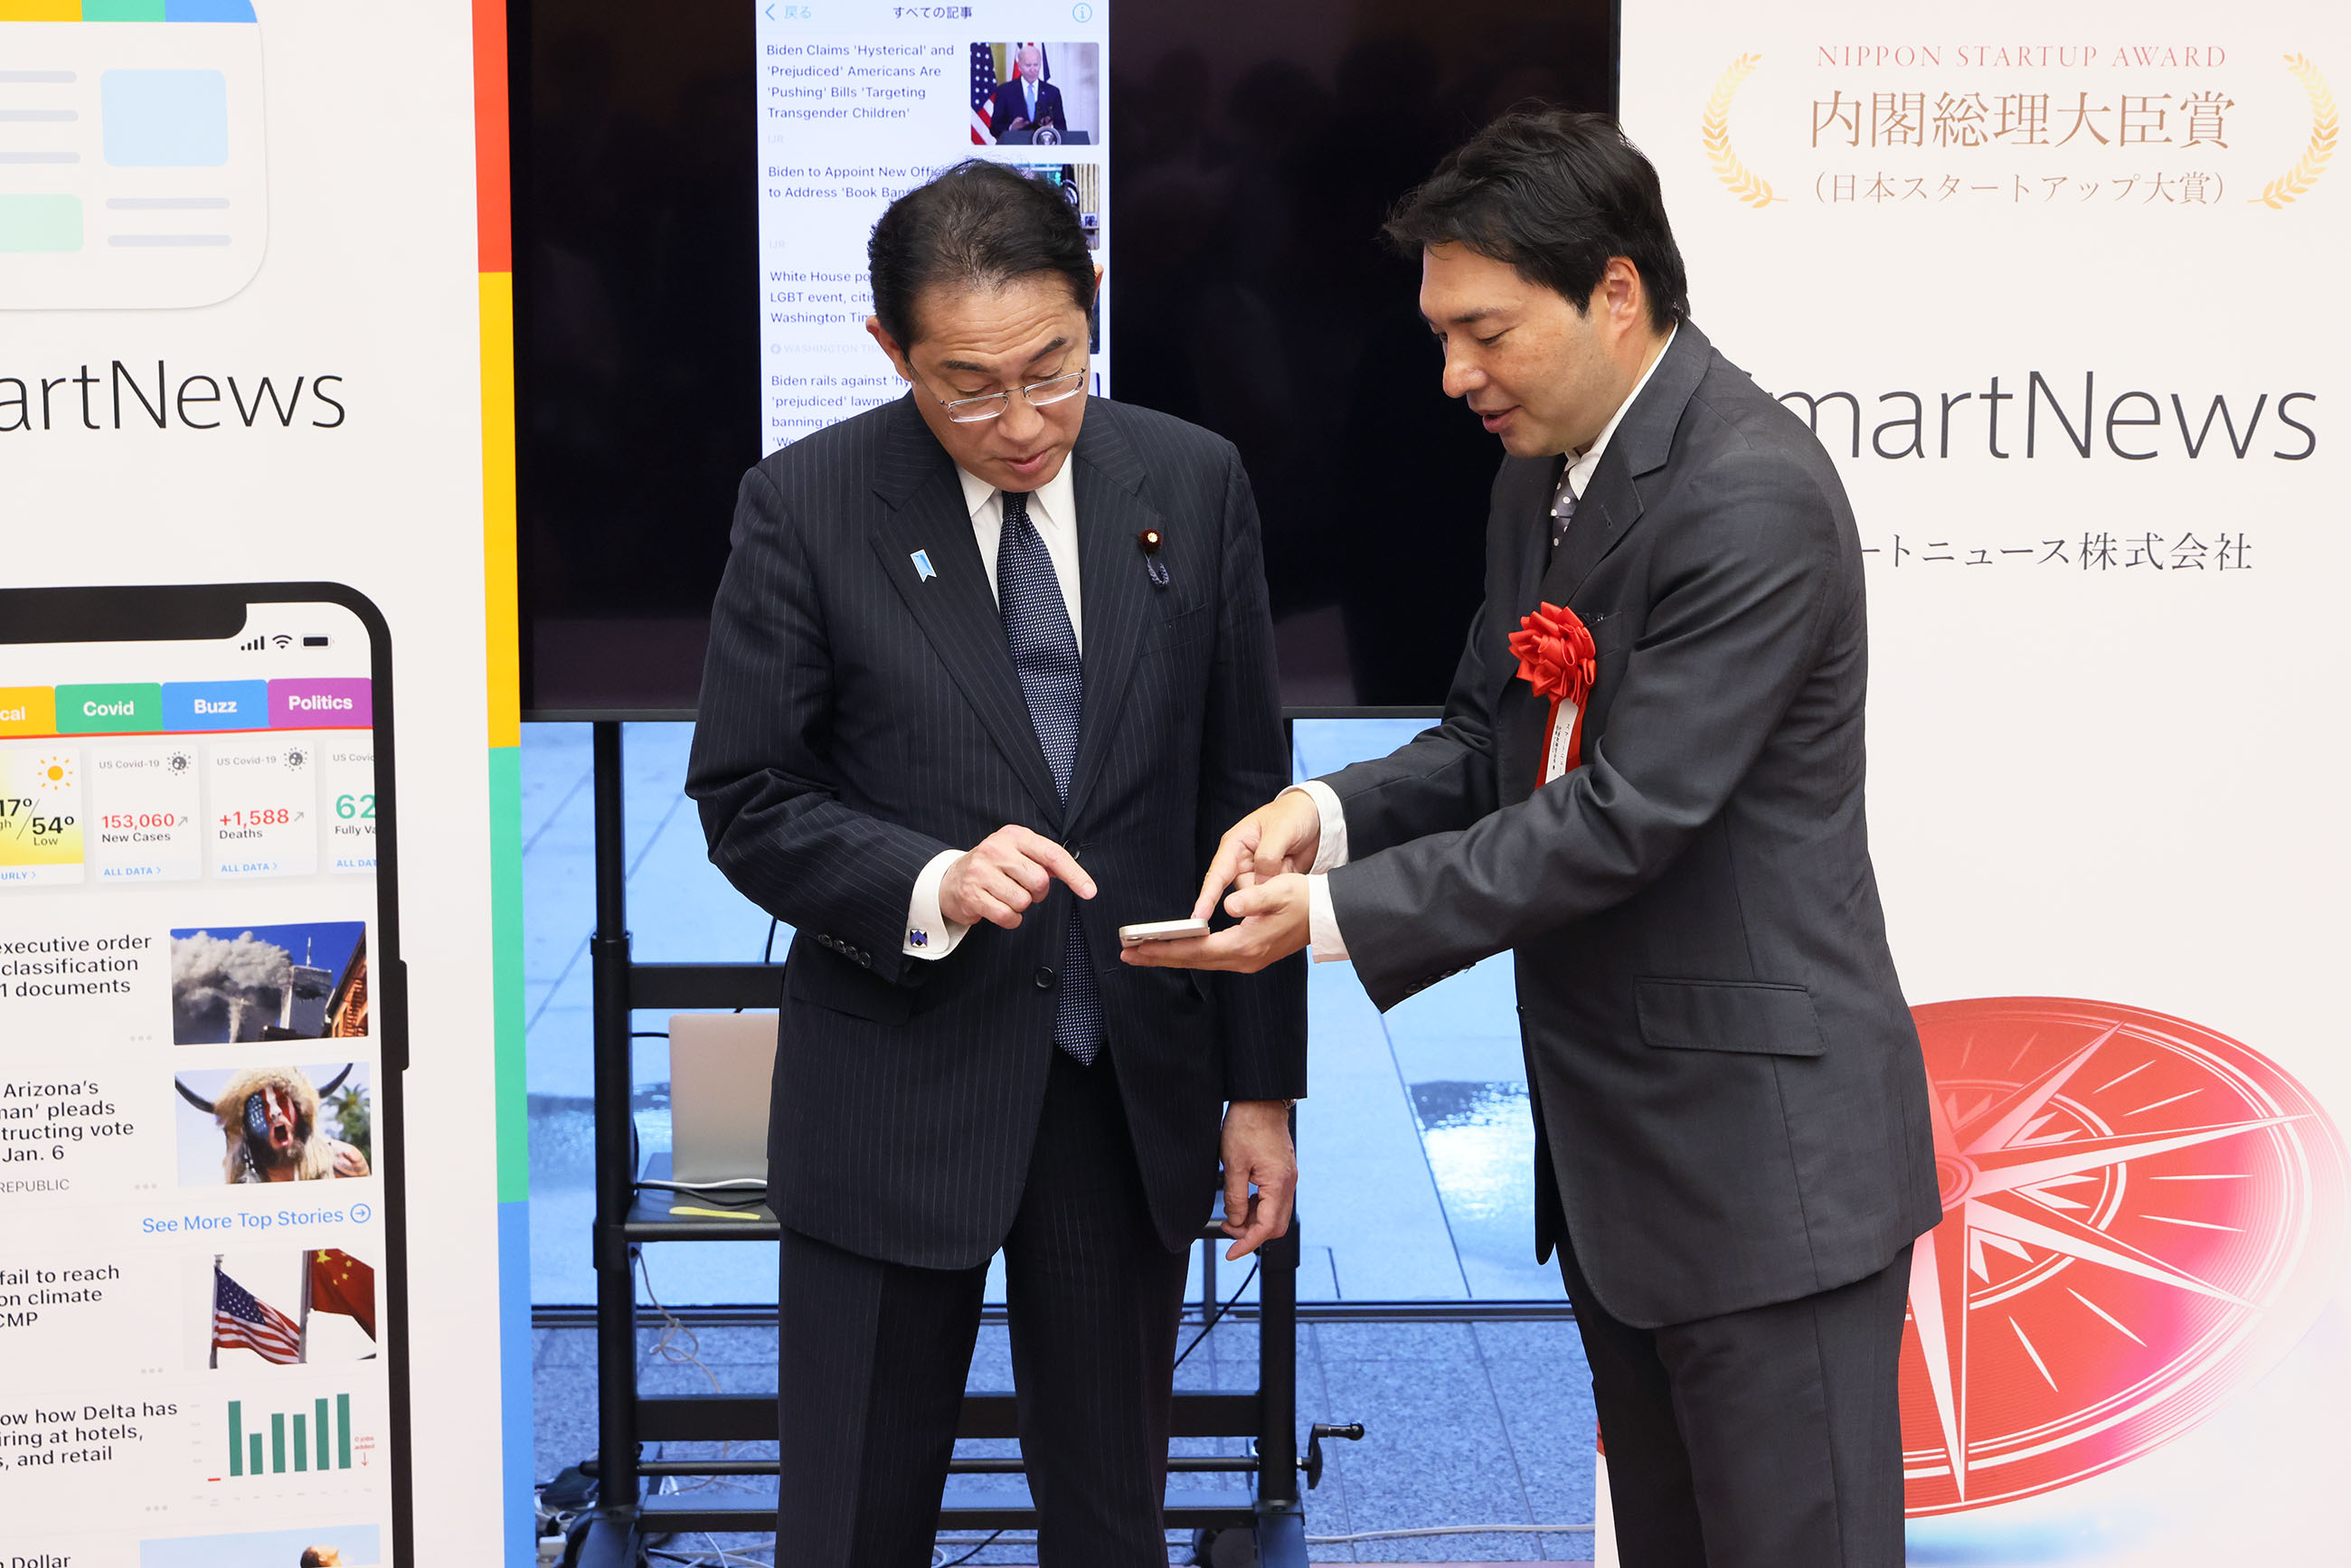 Prime Minister Kishida viewing the exhibition booth of award winners (3)